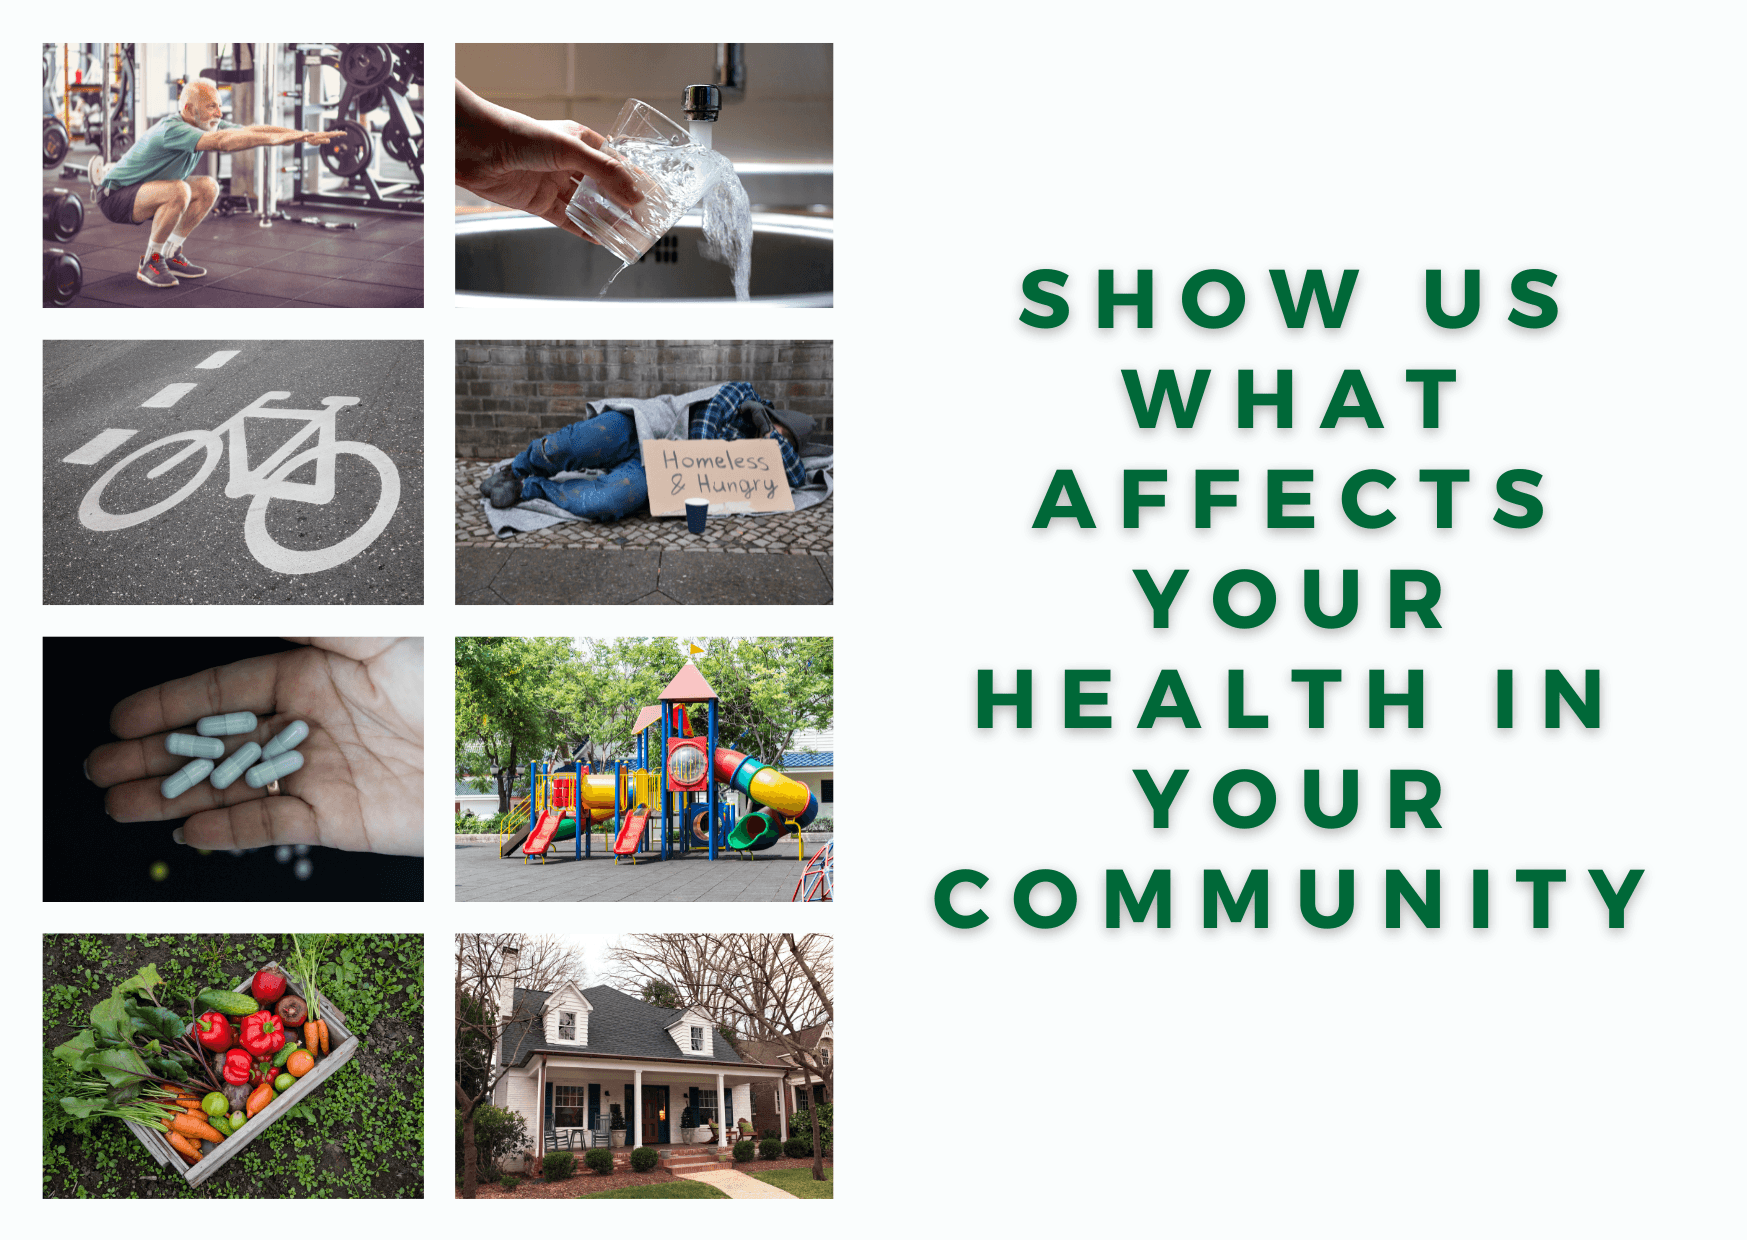 What does health look like to you in your community?